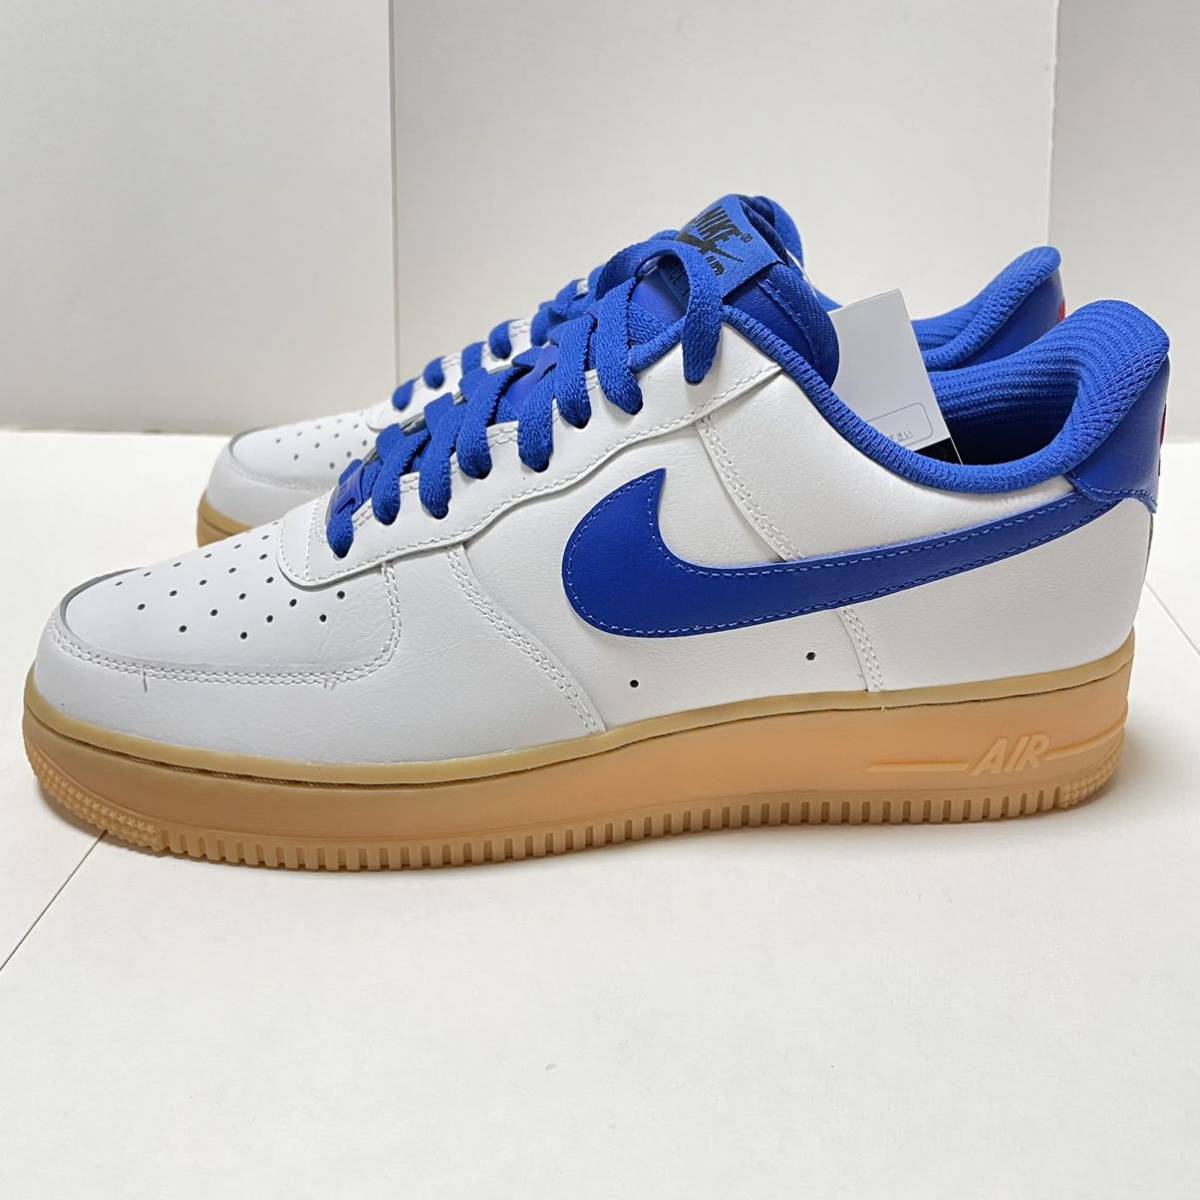 NIKE BY YOU AIR FORCE1 ナイキ バイユー エアフォース1 US9 5 27 5cm 